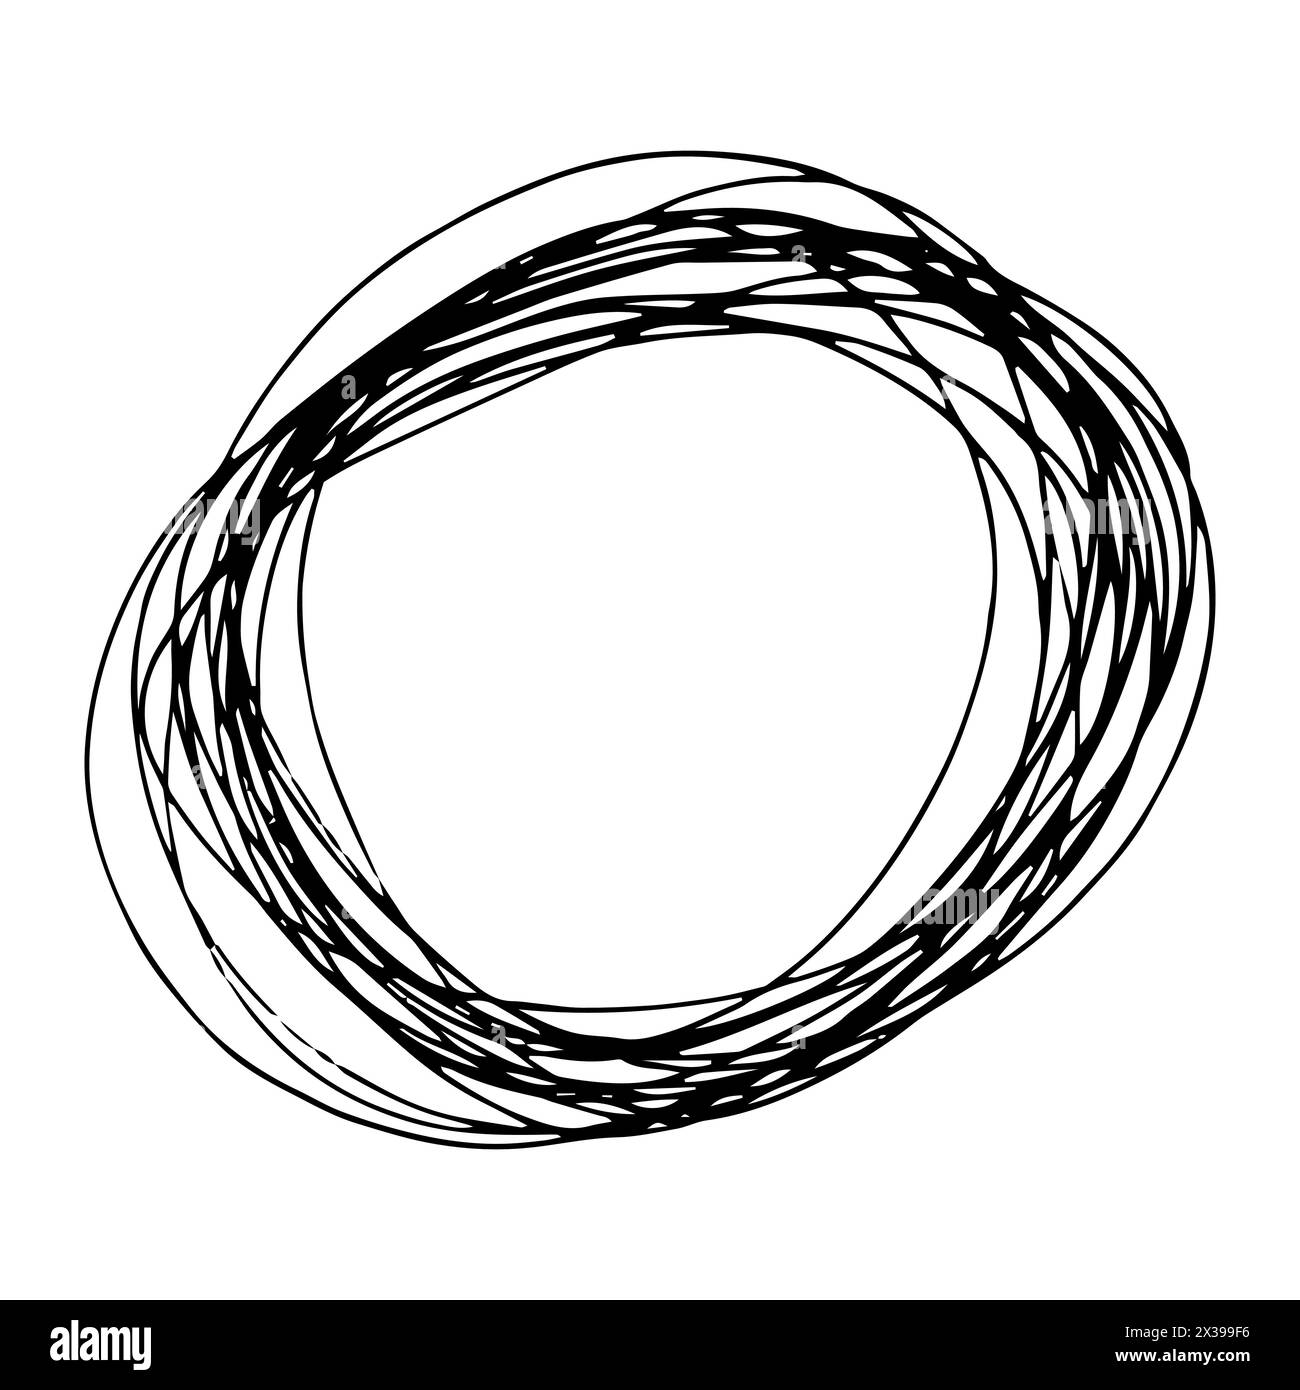 Sketch Hand drawn Ellipse Shape. Abstract Pencil Scribble Drawing. Vector illustration. Stock Vector